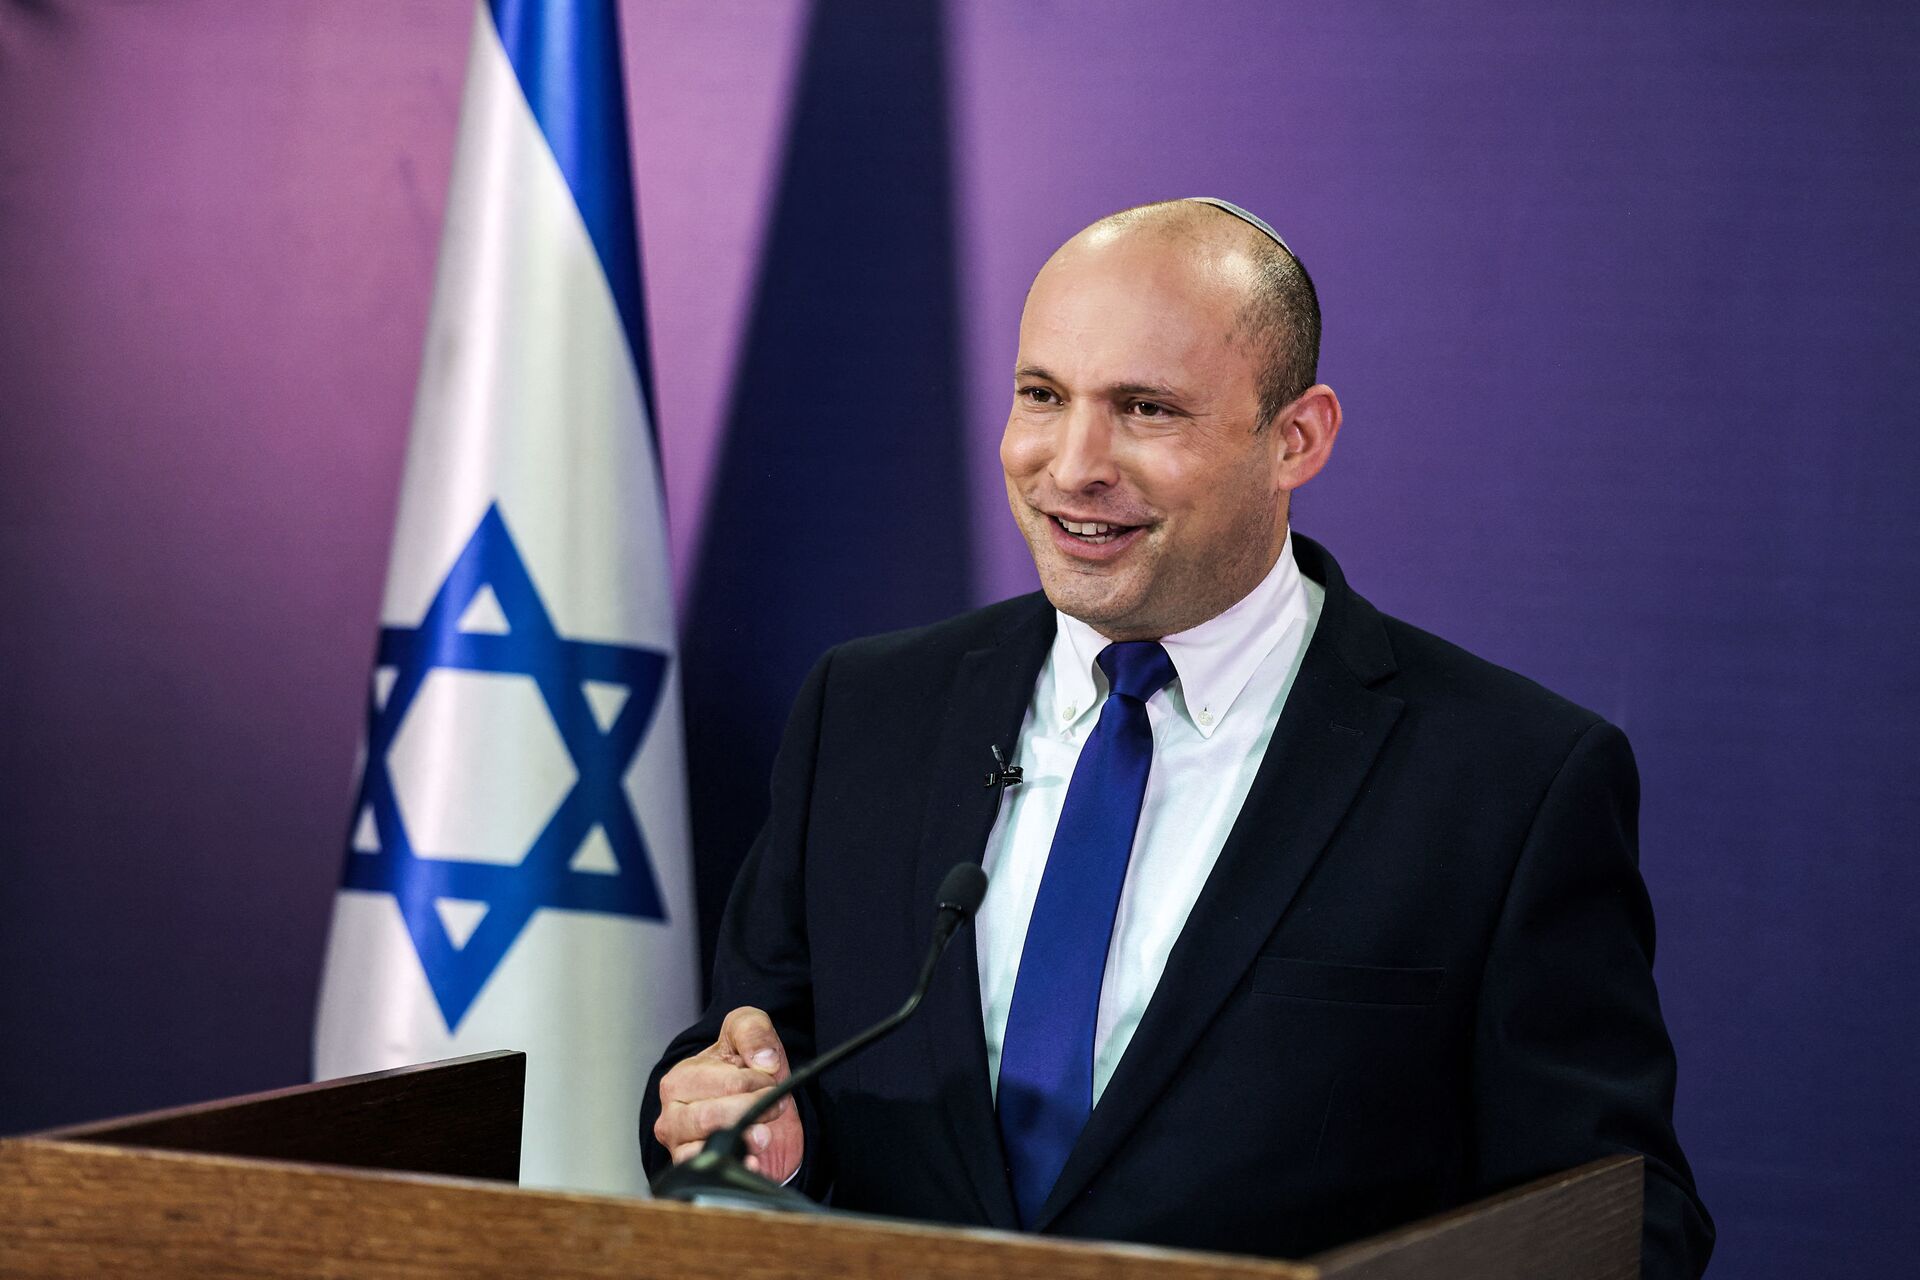 Naftali Bennett, Israeli parliament member from the Yamina party, gives a statement at the Knesset, Israel's parliament, in Jerusalem on June 6, 2021. - In power for 12 consecutive years, Israel's embattled Prime Minister Benjamin Netanyahu faces being toppled by a motley coalition of lawmakers united only by their shared hostility towards him. Under the agreement, the right-wing nationalist Bennett would be premier for two years, to be replaced by the centrist Yair Lapid of the Yesh Atid party in 2023. - Sputnik International, 1920, 29.12.2021